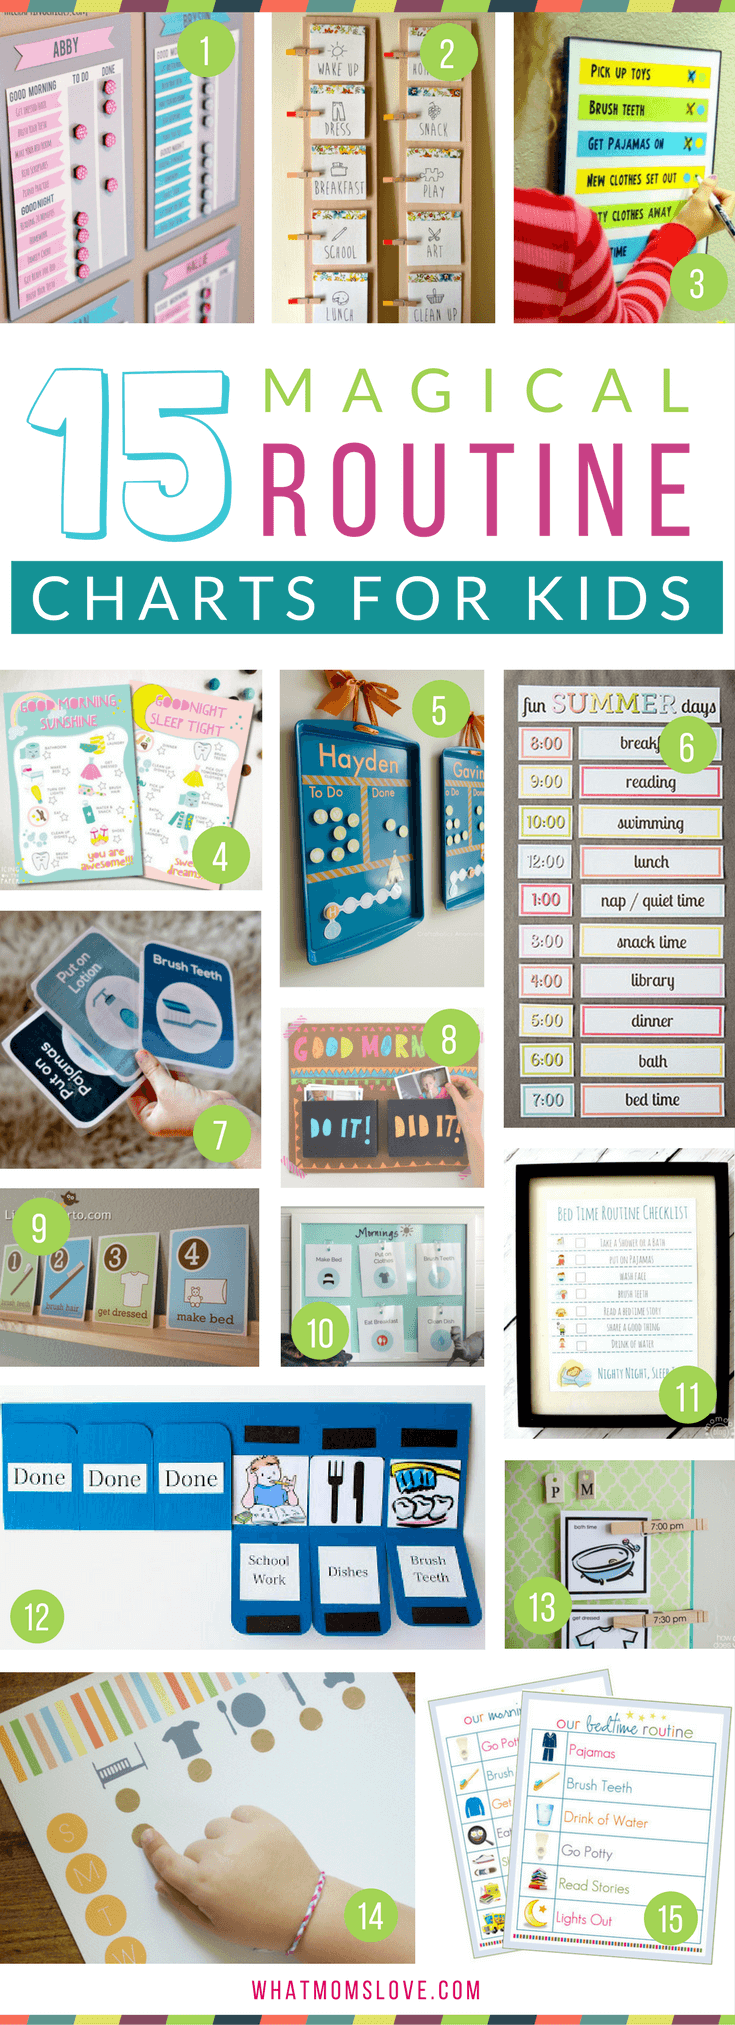 Morning and Bedtime Daily Routine Charts for Kids - perfect for keeping them on a schedule over the summer or for back to school. DIY and printable routine charts to help teach kids independence!